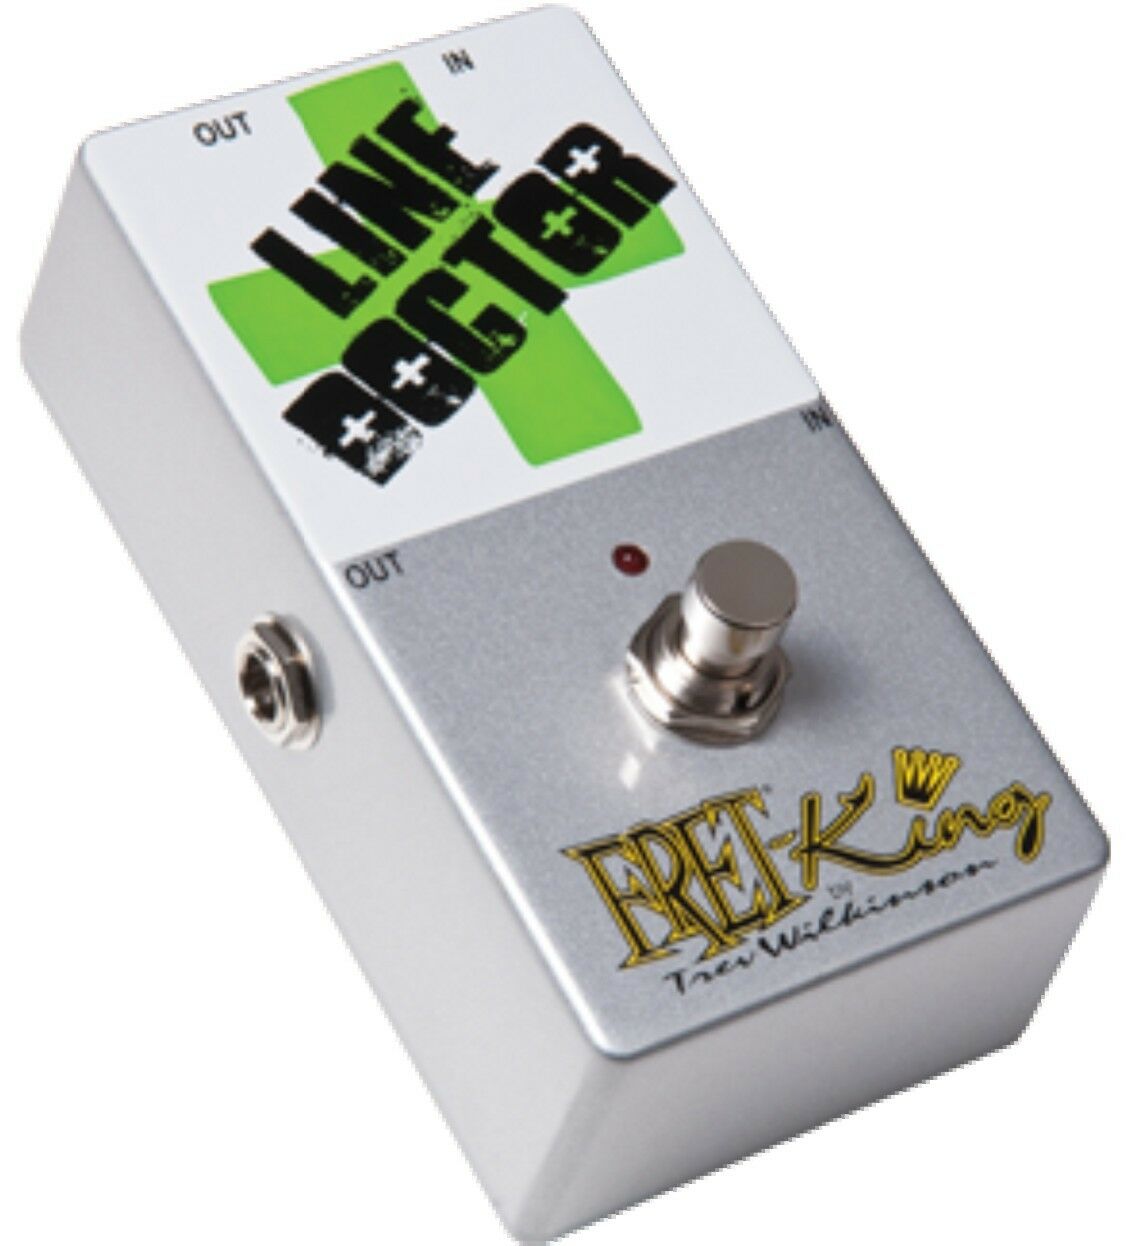 Fret King Line Doctor Pedal - Effects Pedals - Fret King